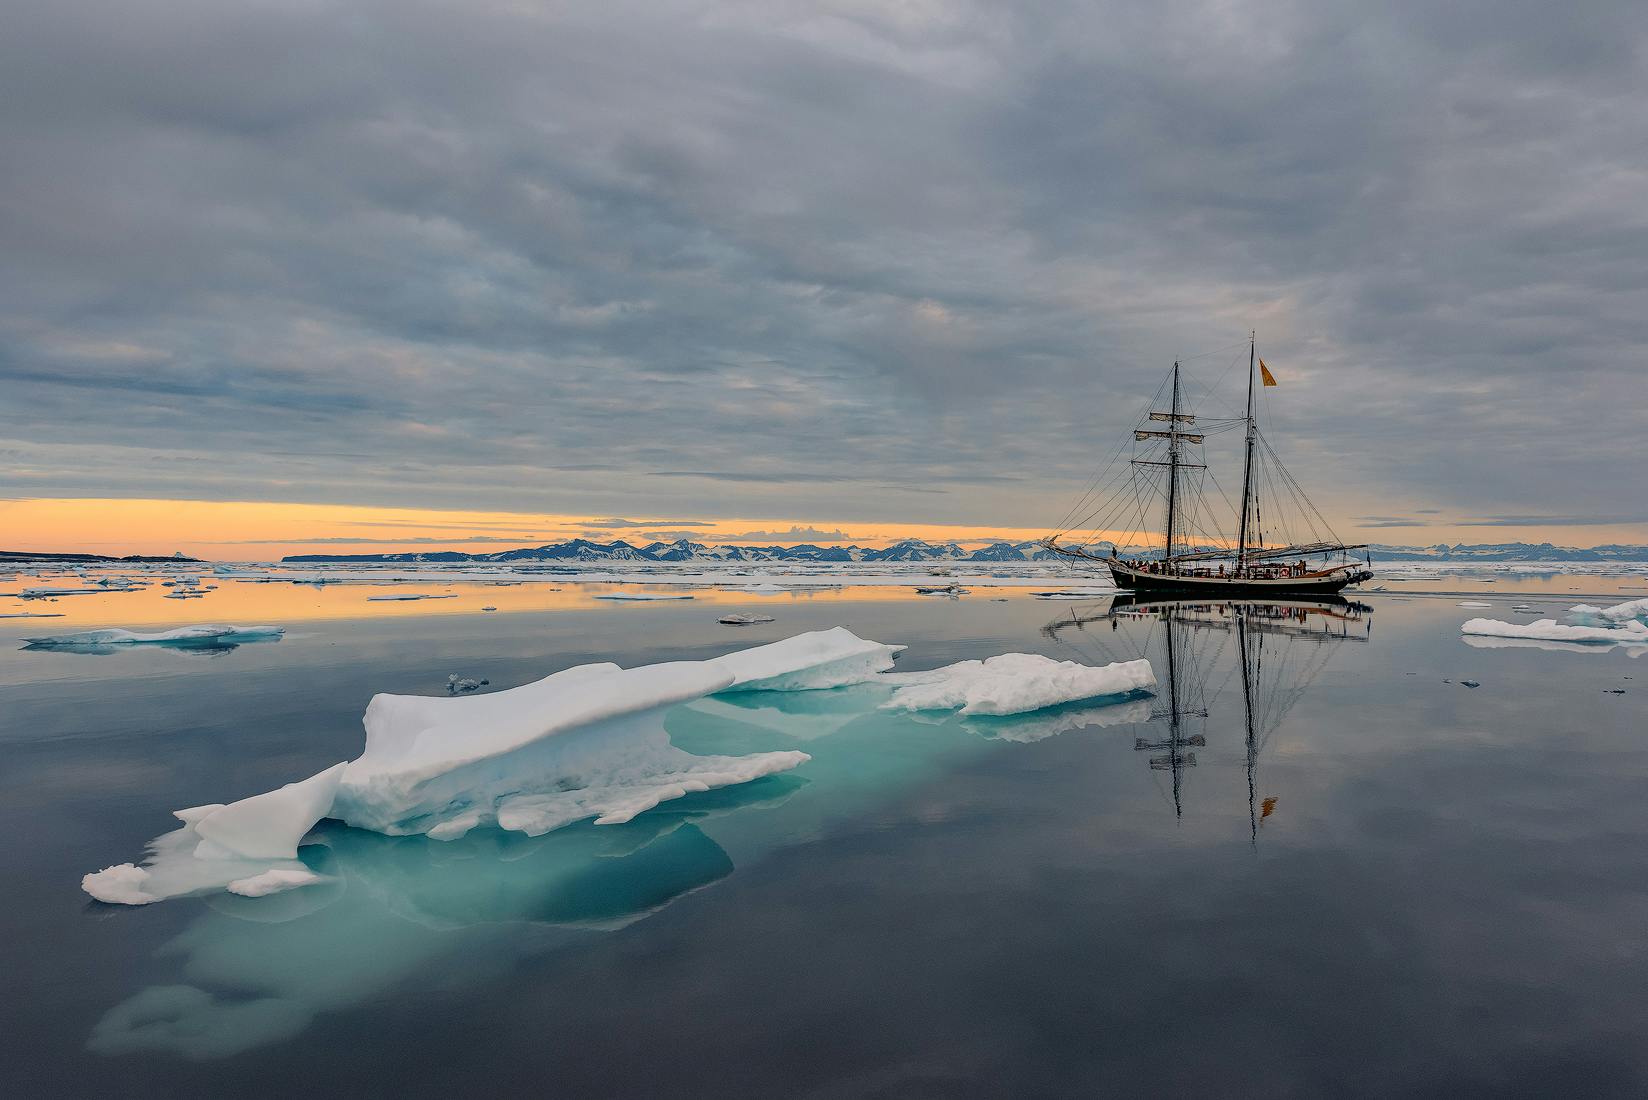 Epic 10 Day Greenland Sailing Trip & Photography Workshop with Transfer from Reykjavik - day 2